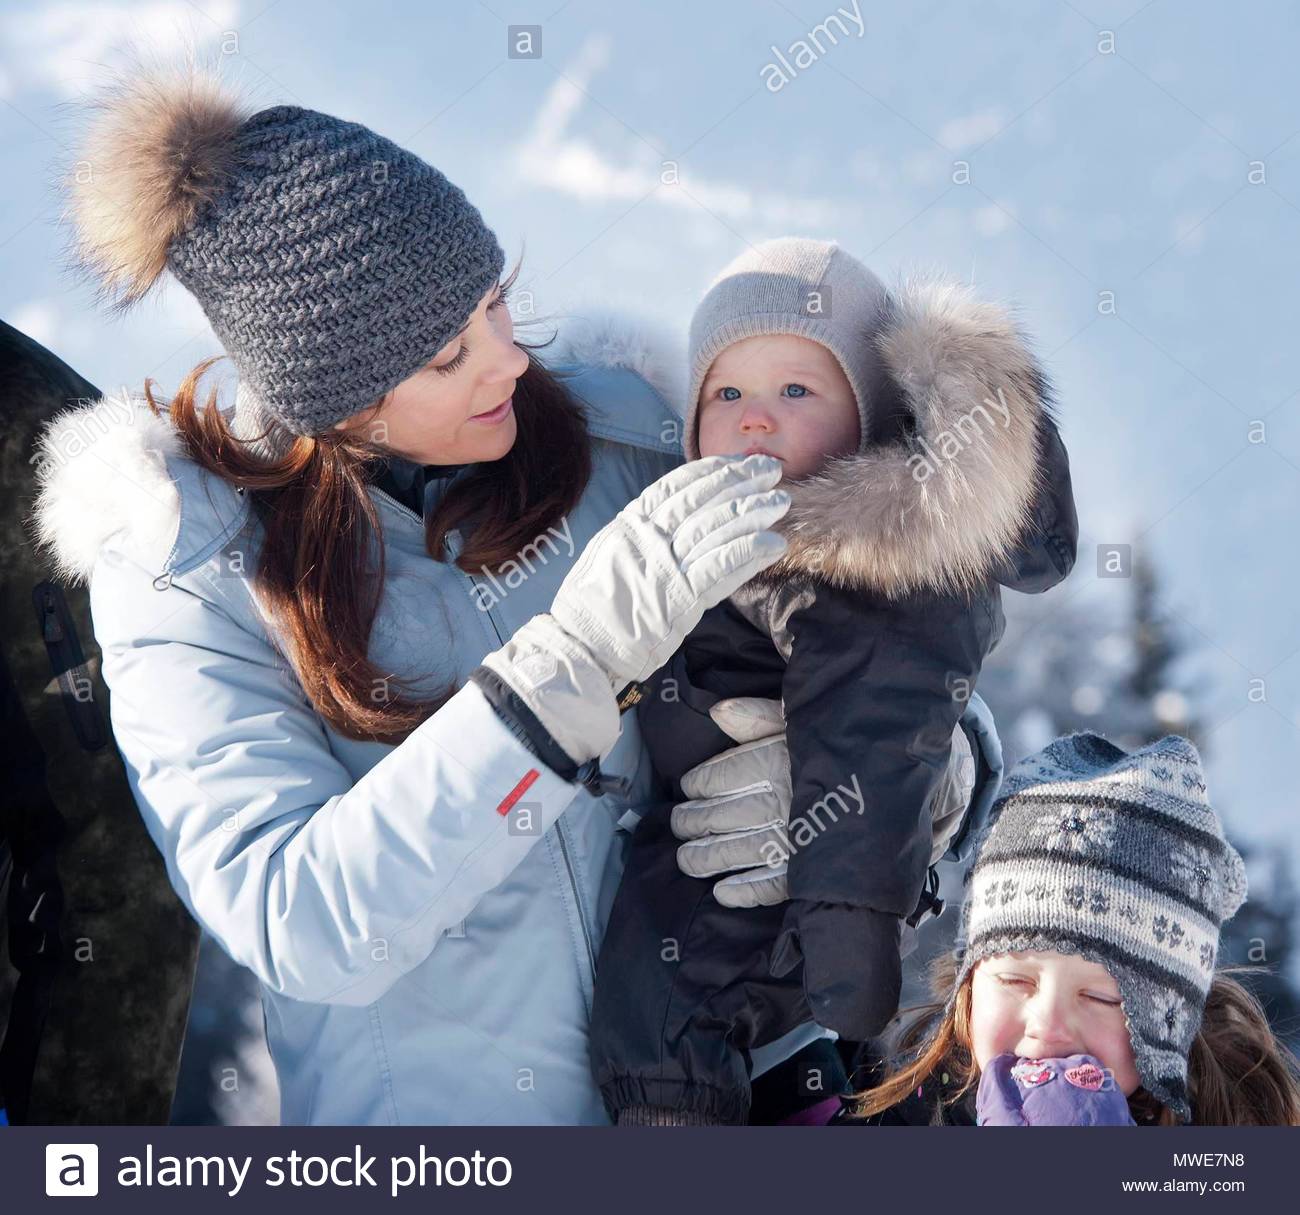 hrh-crown-princess-mary-hrh-prince-vincent-hrh-crown-princess-mary-and-hrh-crown-prince-frederik-with-their-children-prince-christian-princess-isabella-prince-vincent-and-princess-josephine-on-skiing-holiday-in-verbier-switzerland-photo-all-over-press-denmark-martin-hoien-MWE7N8.jpg